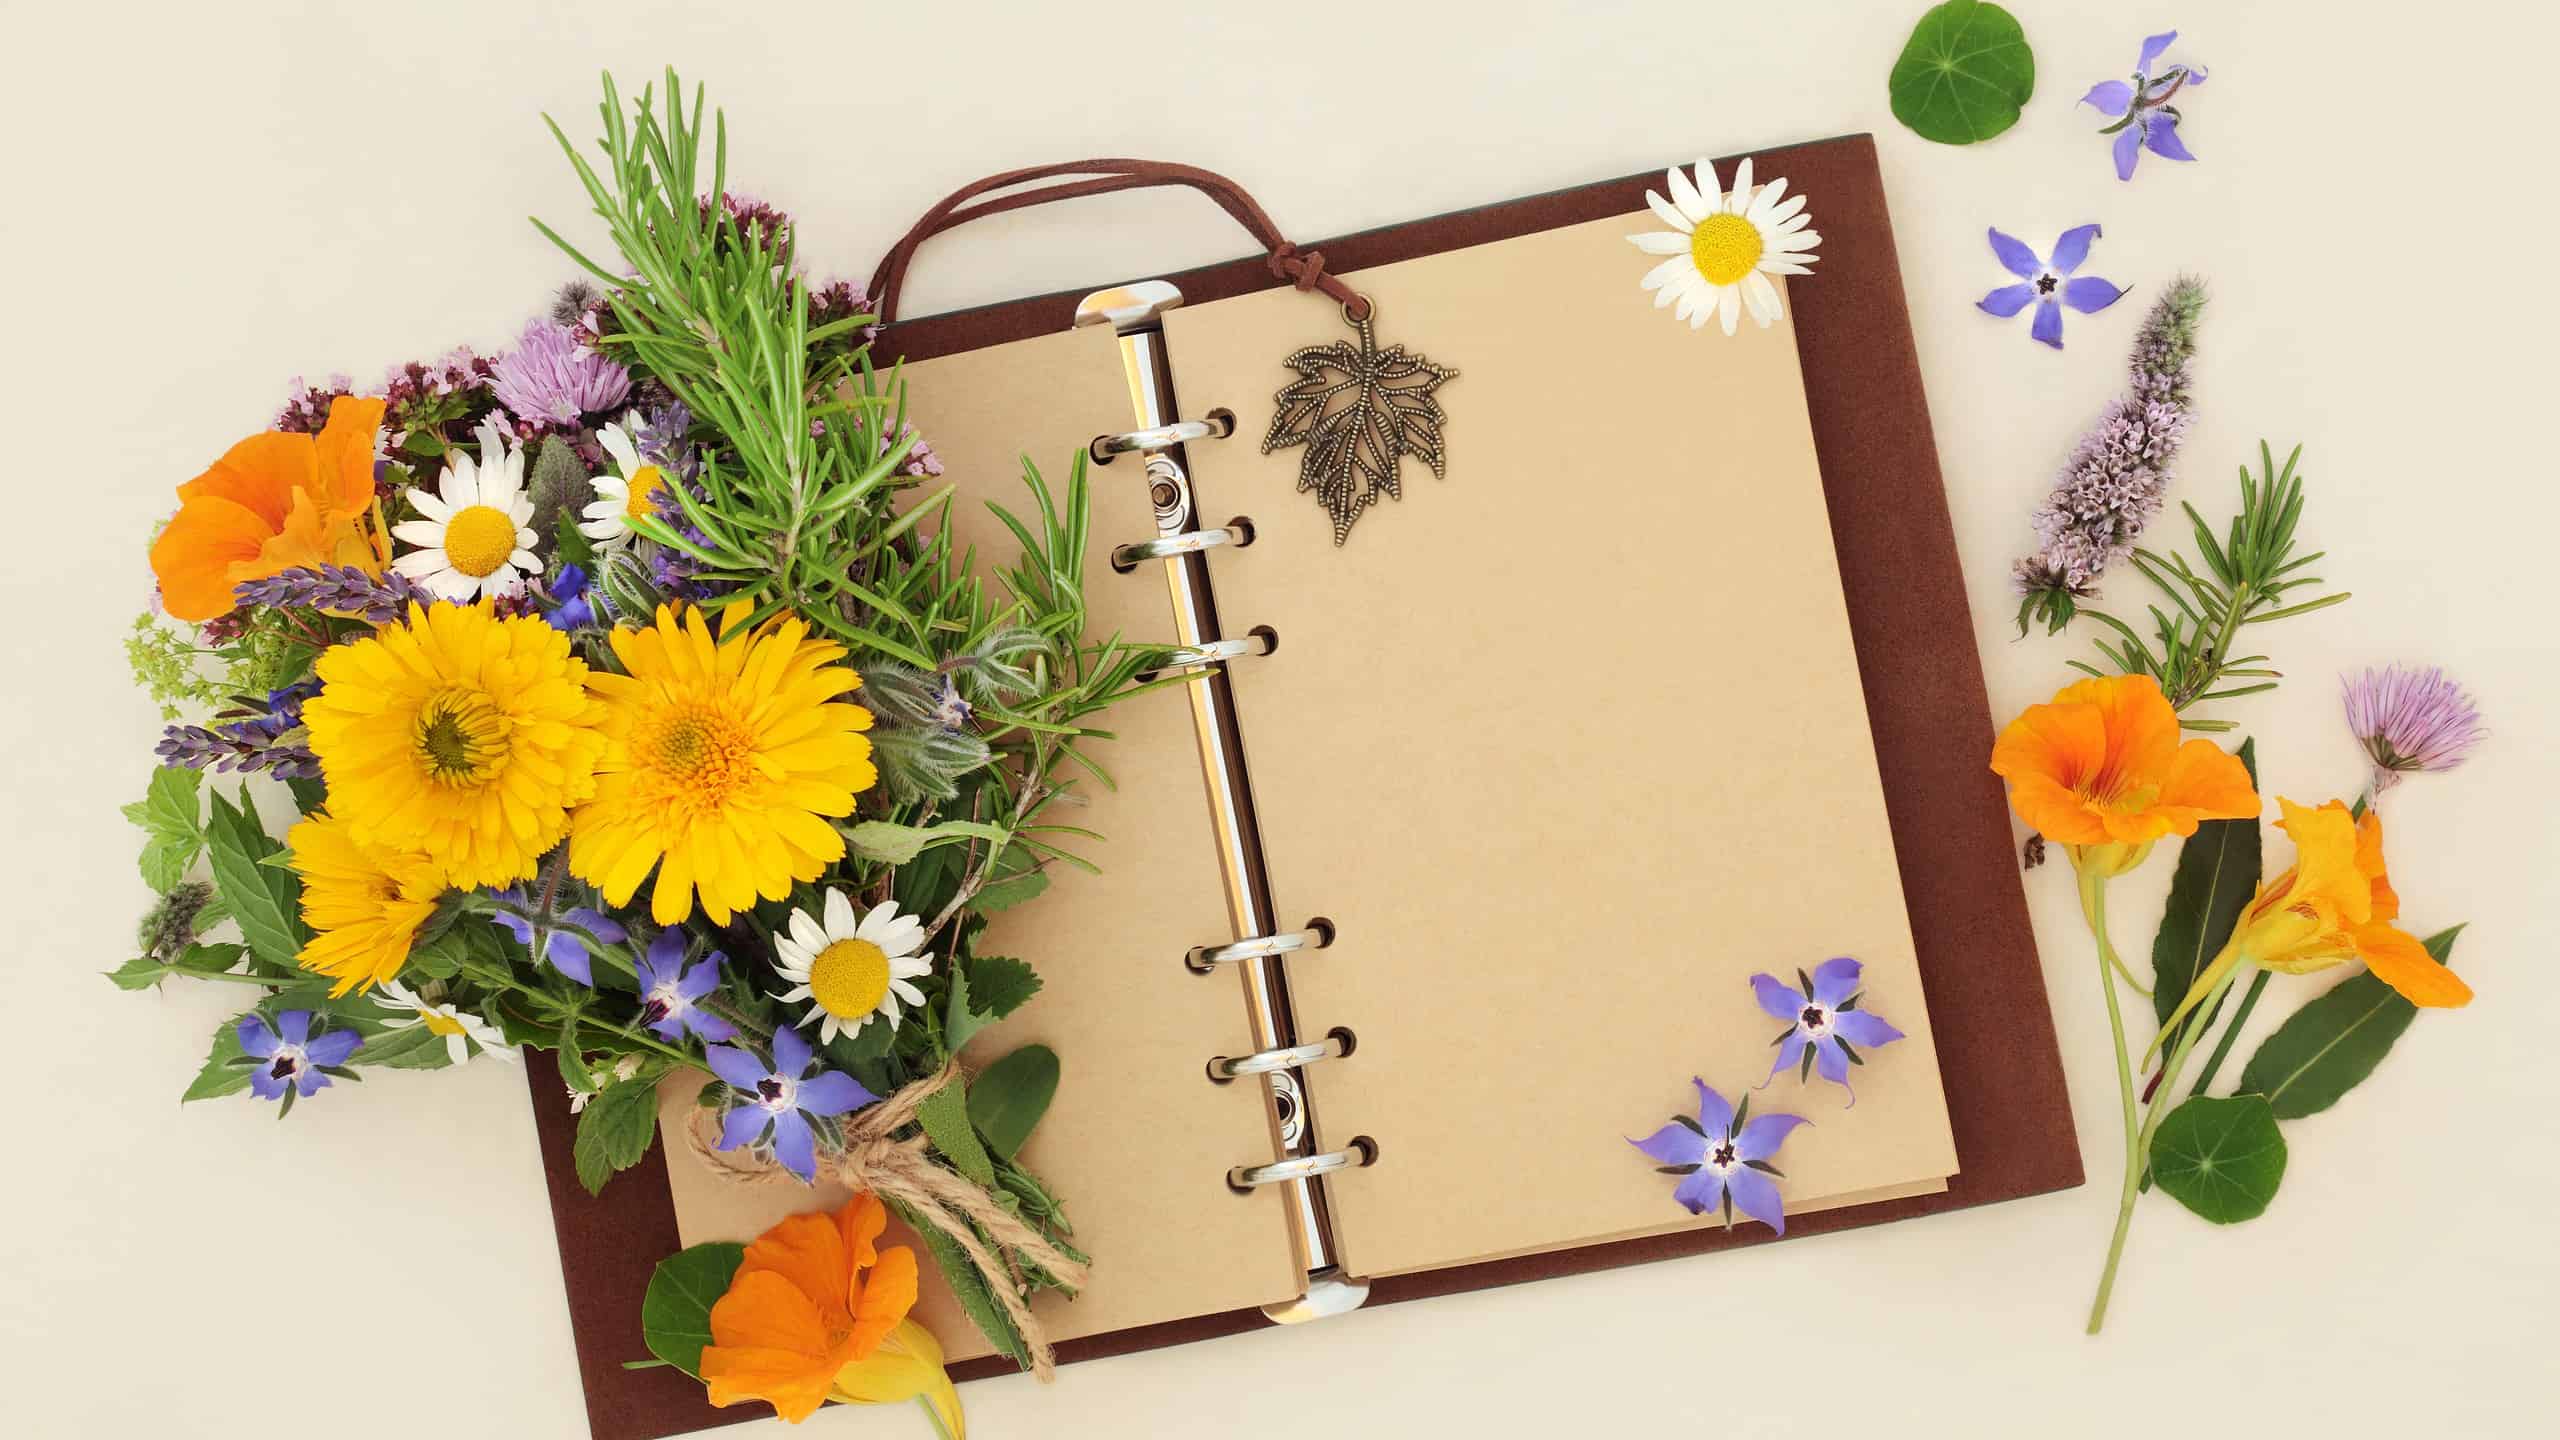 Old leather notebook with open blank pages for garden planner or botanical nature study with herbs and flowers used in natural alternative plant remedies. Flat lay, on cream, copy space.